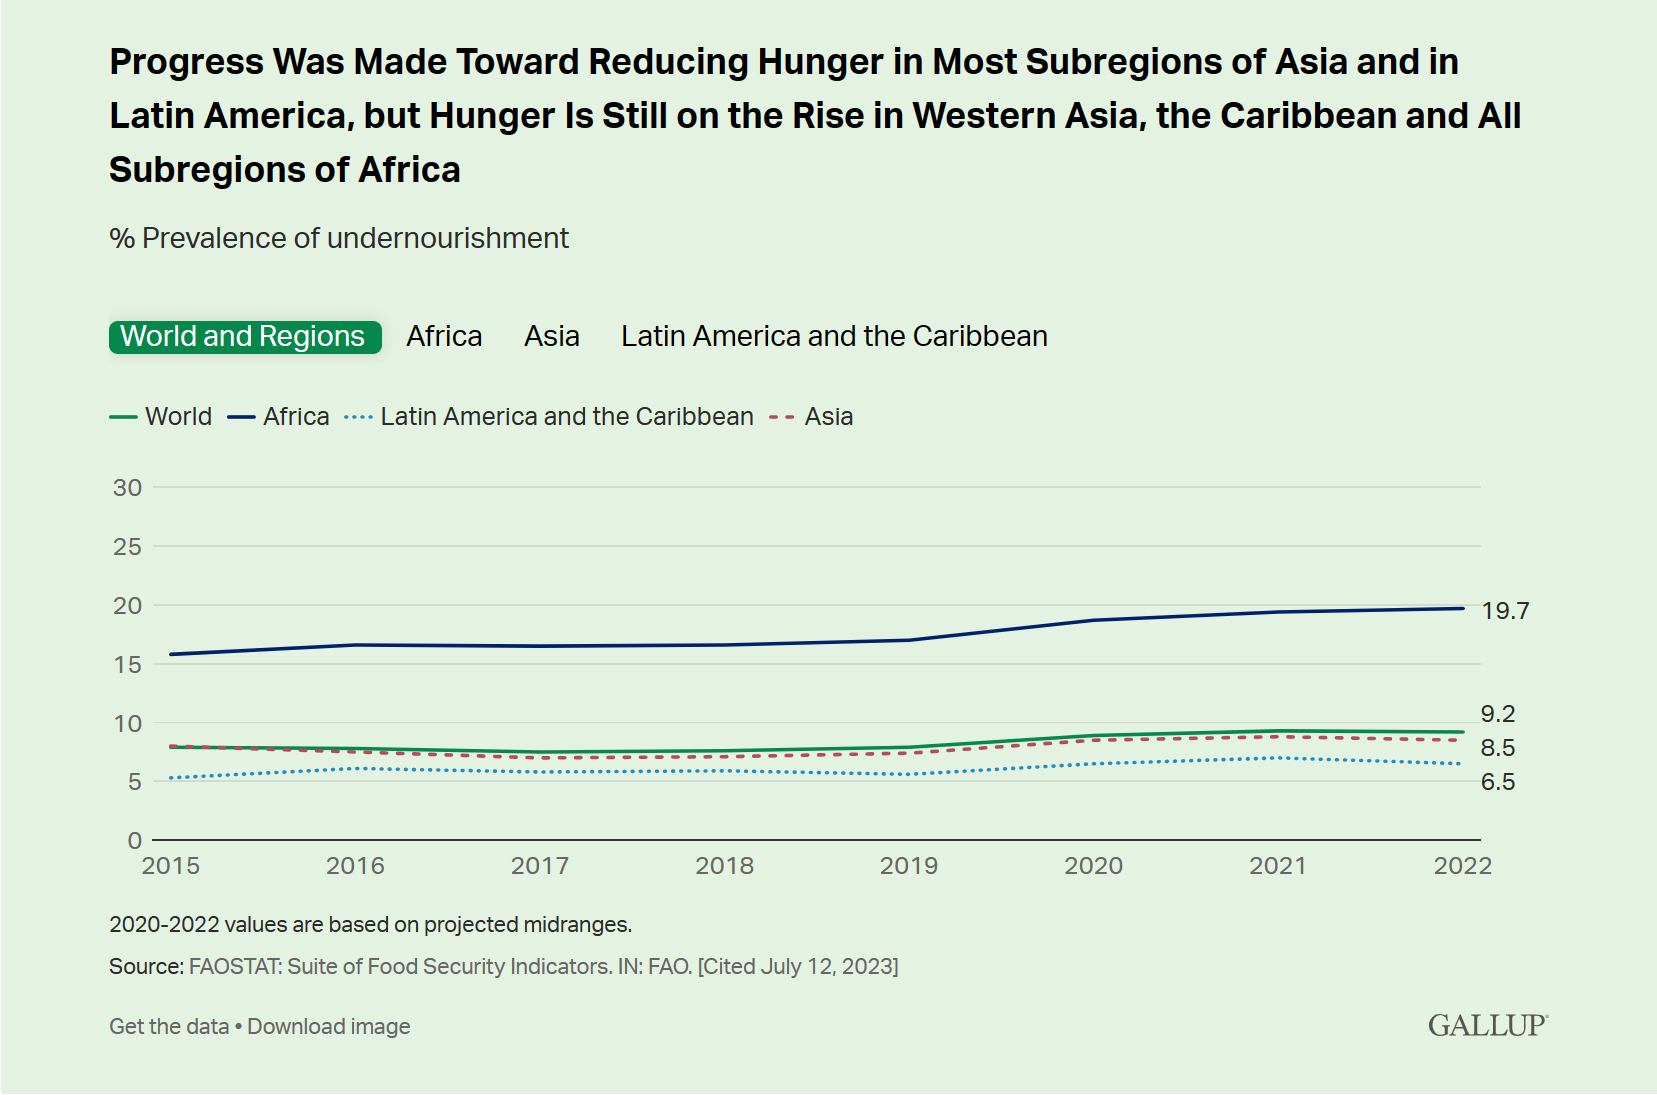 Percent prevalence of undernourishment, 2015-2022. Data: FAOSTAT Suite of Food Security Indicators, cited 12 July 2023. Graphic: Gallup